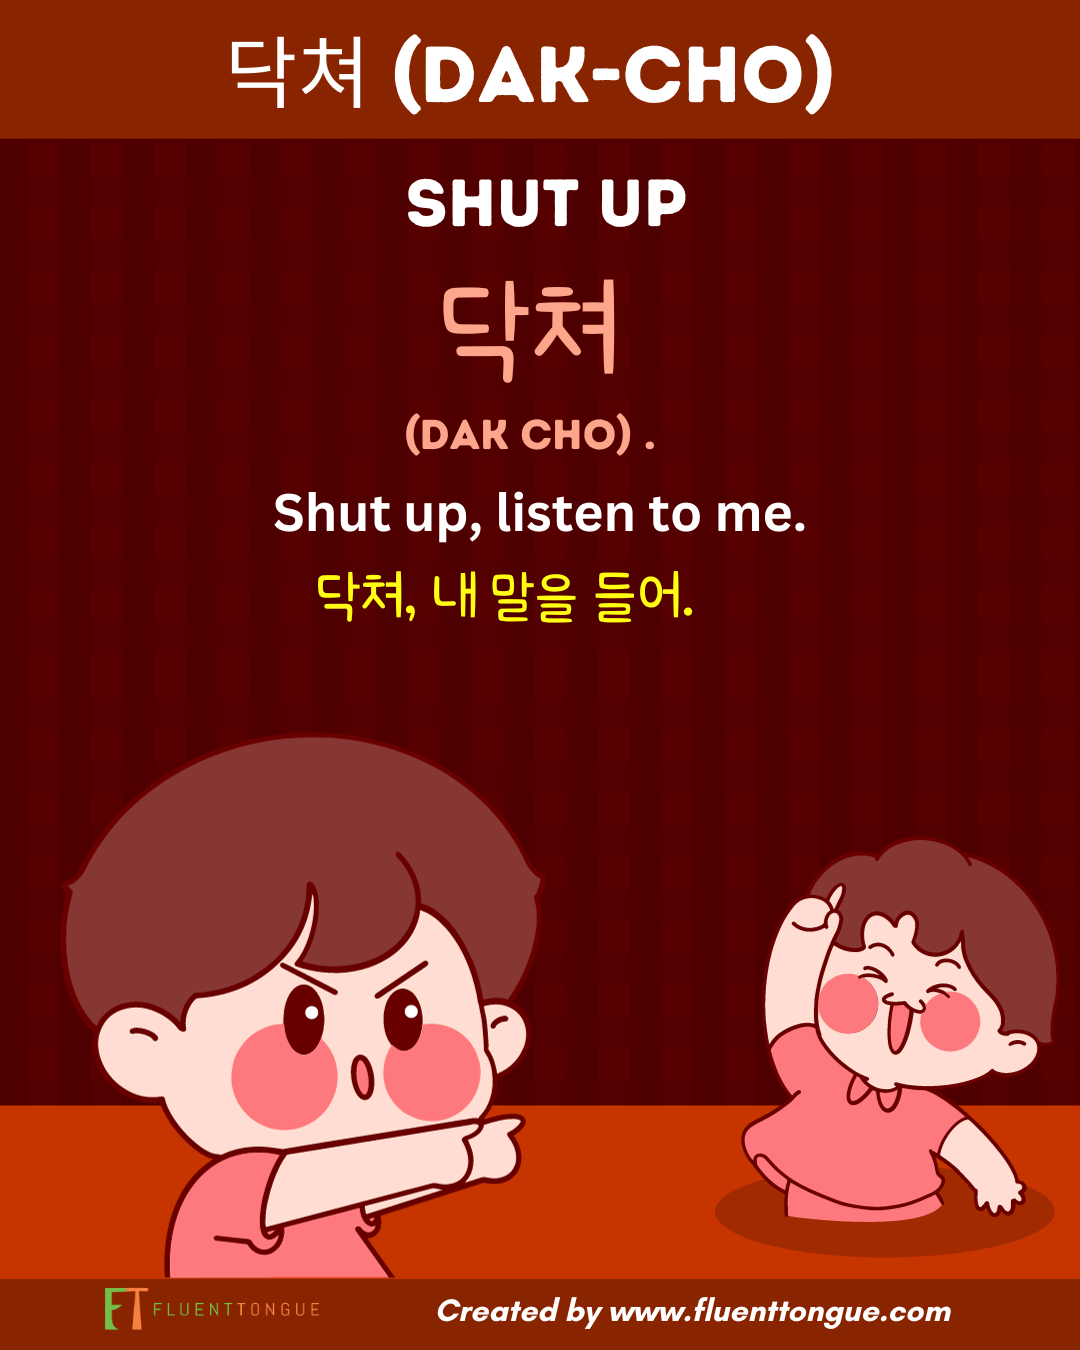 Korean curse words and insults